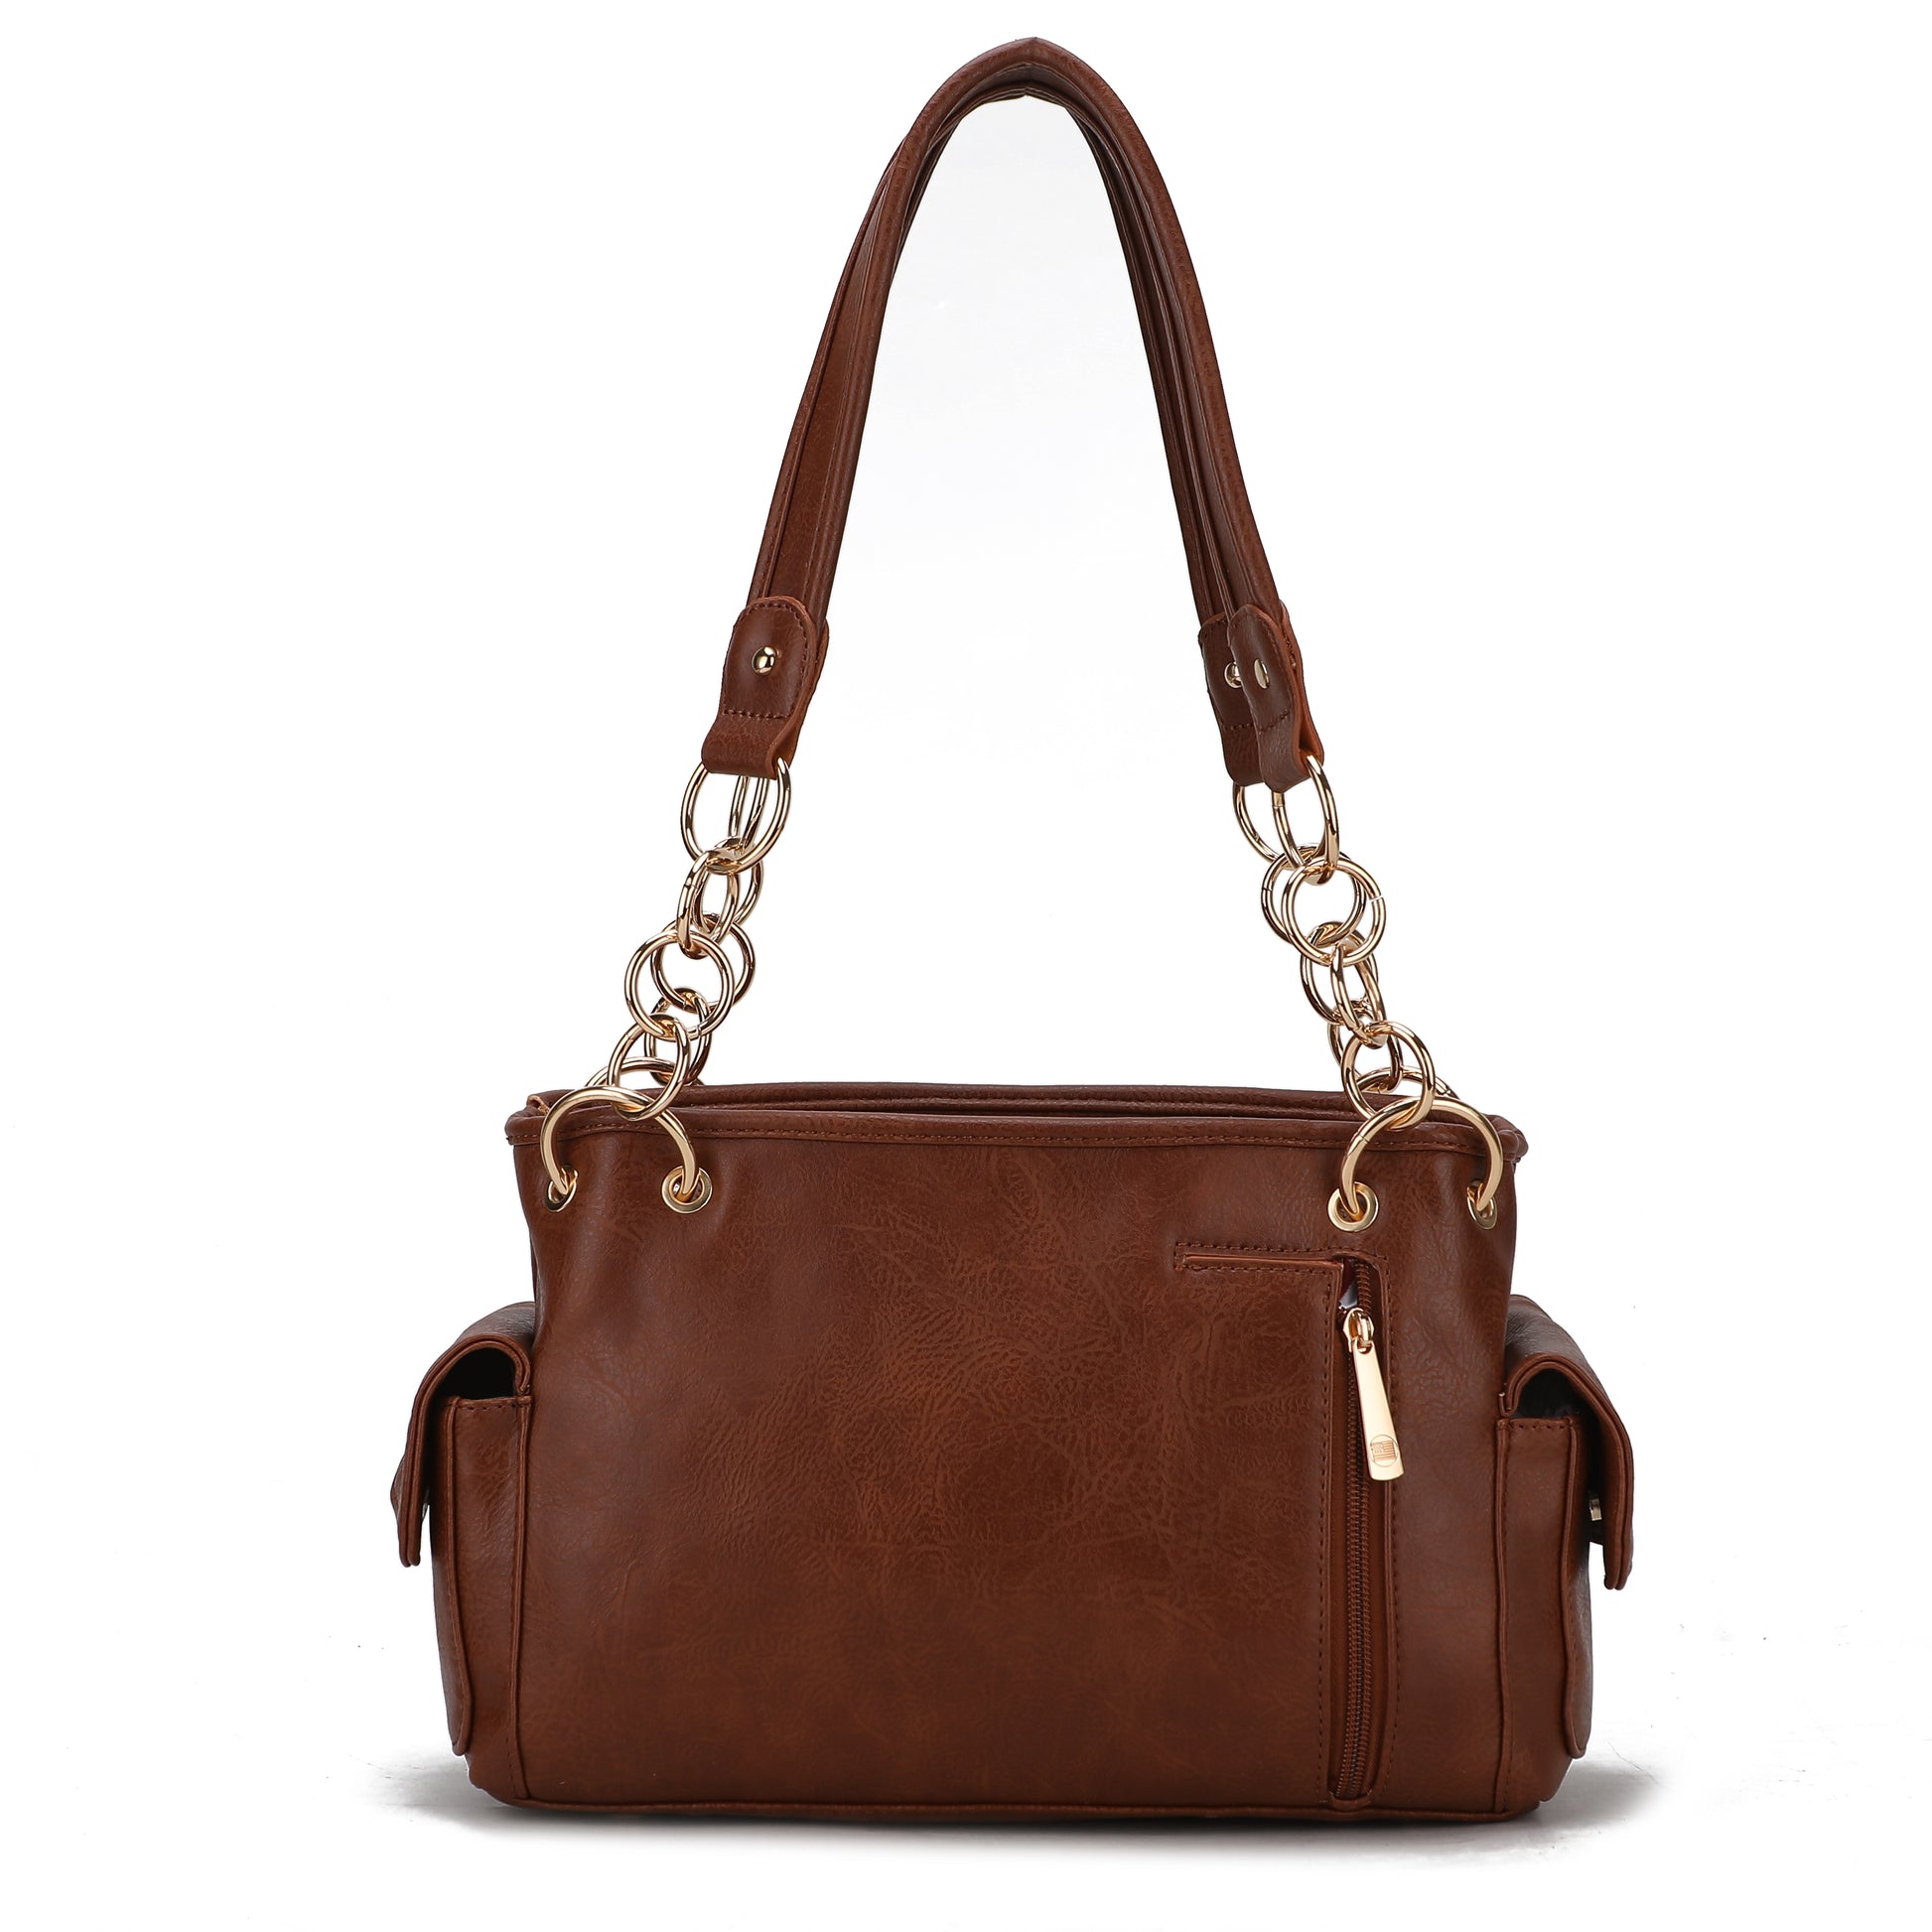 The Pink Orpheus Alaina Vegan Leather Women's Flag Shoulder Bag is a stunning brown handbag that combines style and functionality. Made from vegan leather, this bag features a chain handle.